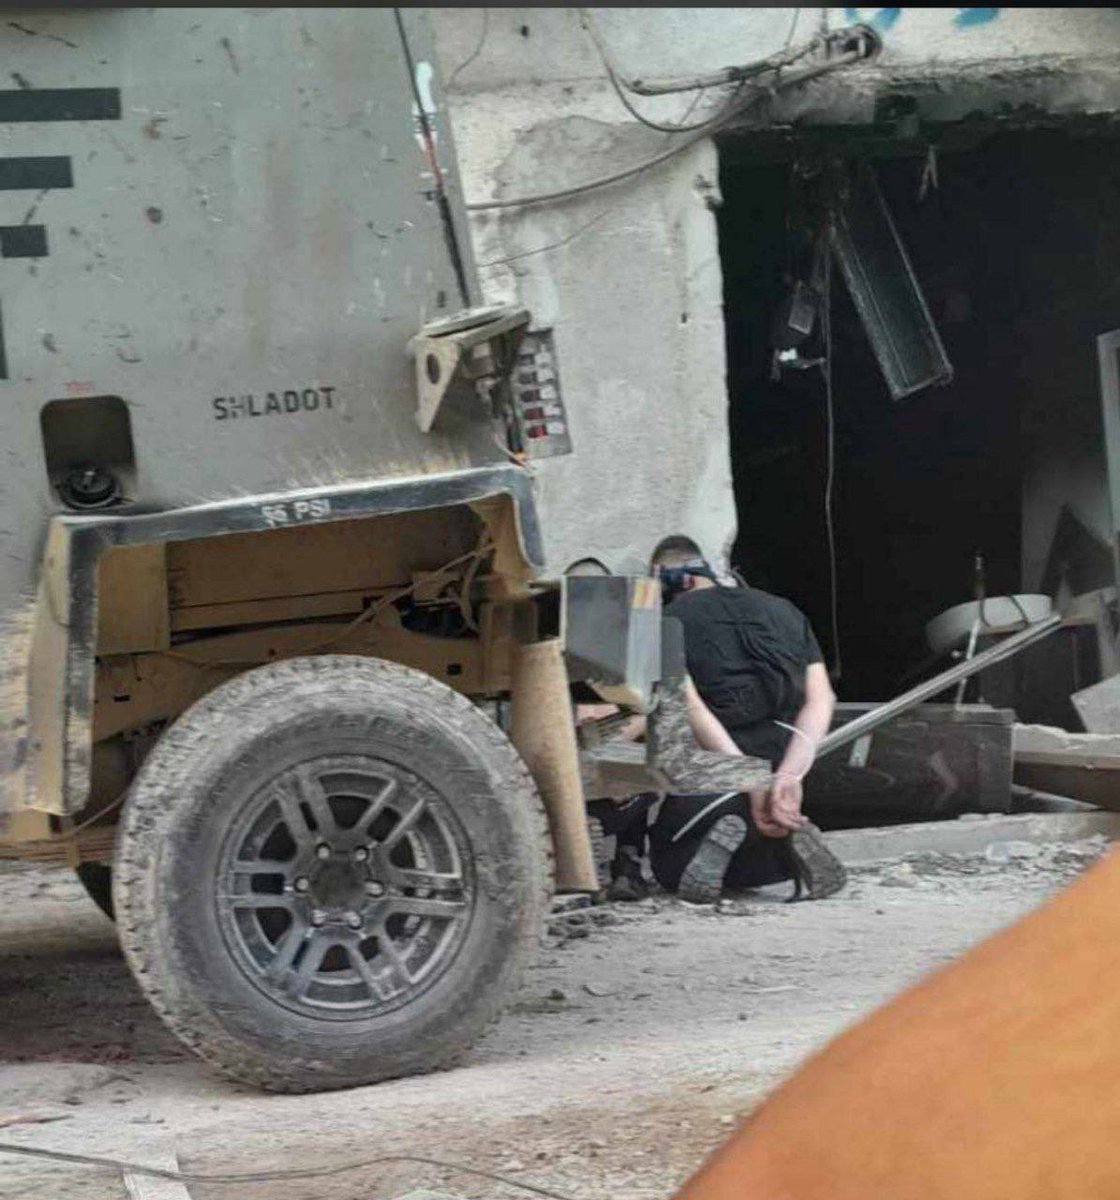 Psychopath military still carrying out its incompetent military attack on Nur Shams refugee camp in Tulkarem with mass detainment campaigns and at least 4 killed in 36 hours with armed confrontation from youth around the camp. Meanwhile Israeli military intensifies assault on